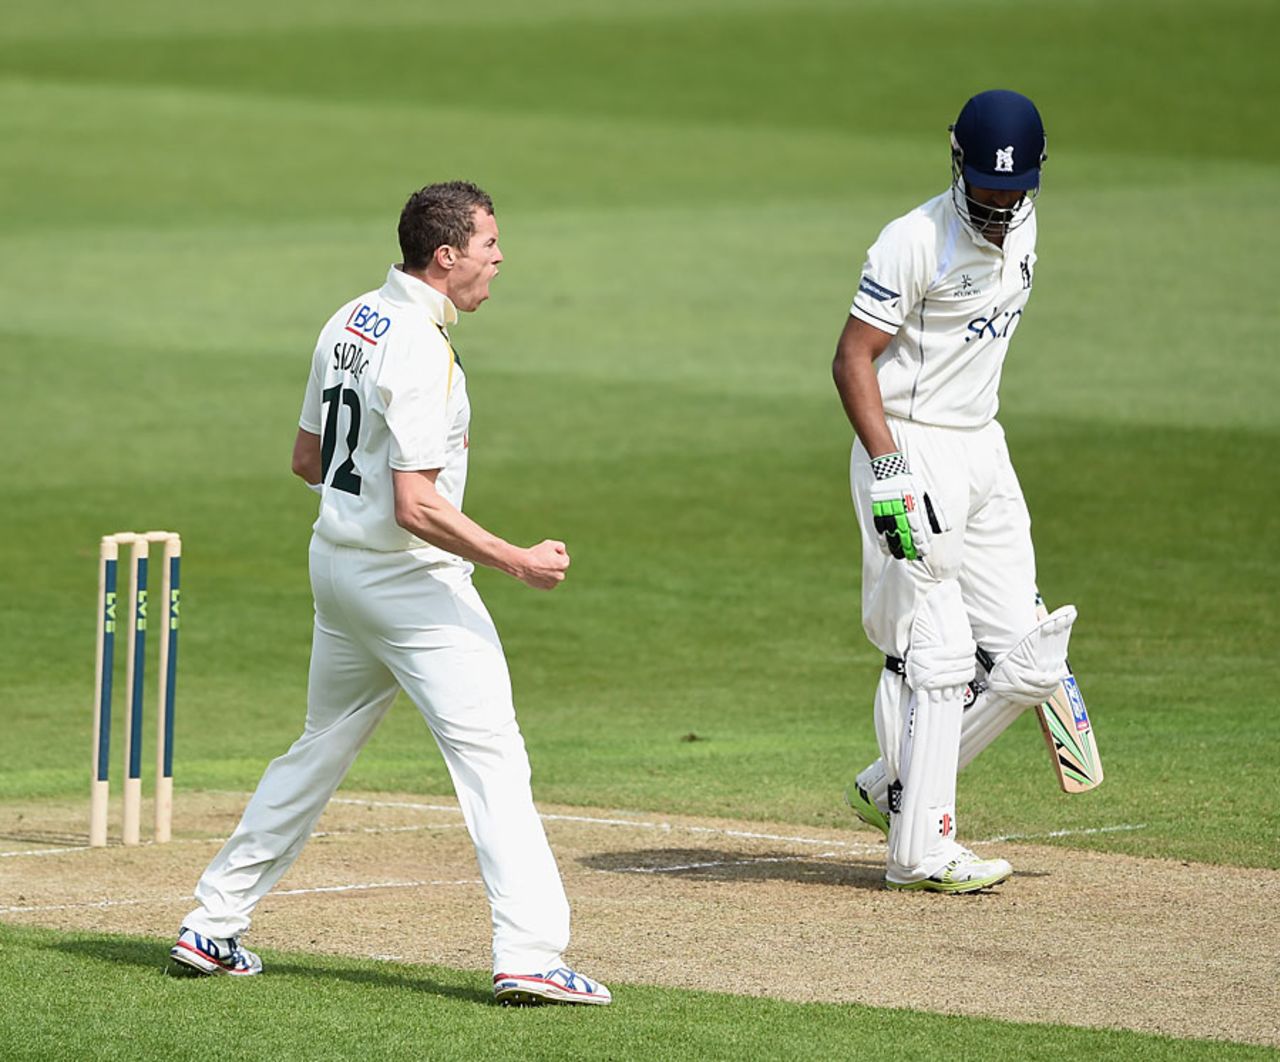 Peter Siddle removed Varun Chopra in his first over and finished with three wickets, Nottinghamshire v Warwickshire, County Championship, Trent Bridge, April 28, 2014